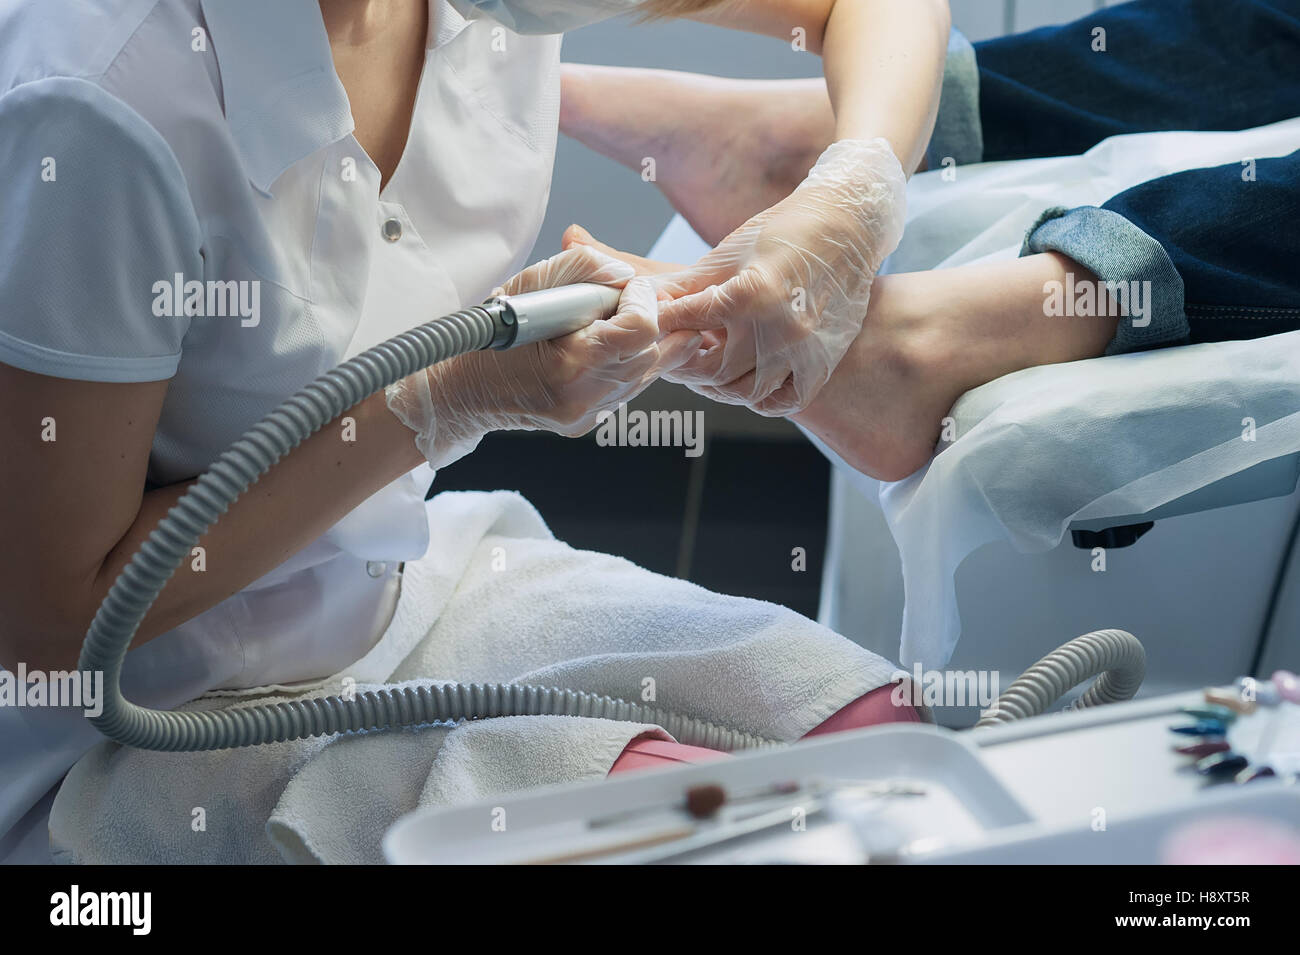 profesional nail technician sanding nails with machine Stock Photo